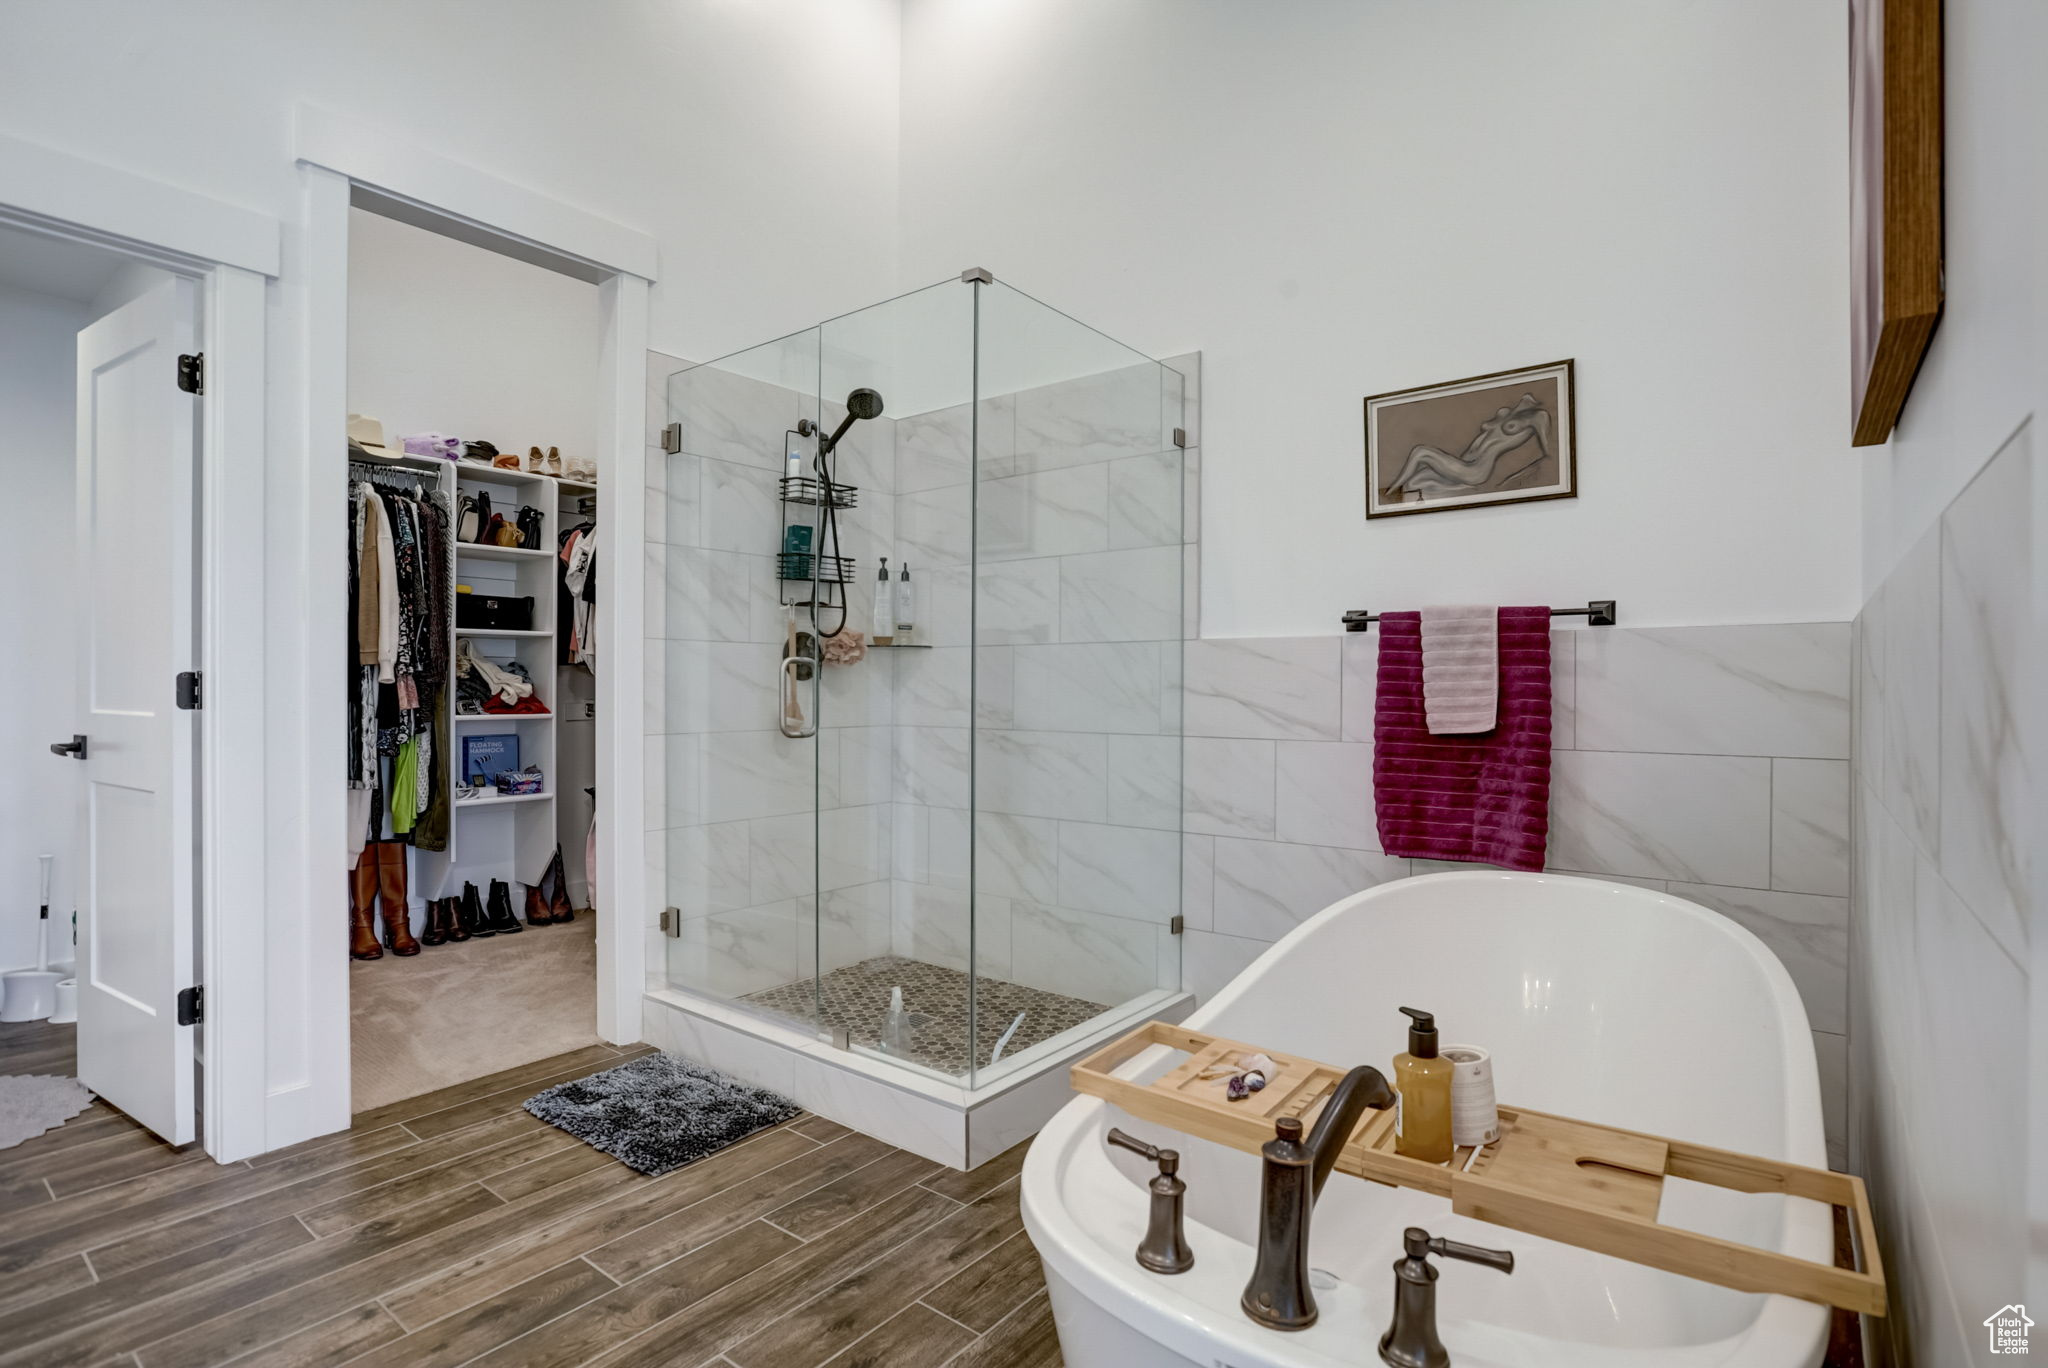 Owner's bathroom with independent shower and bath